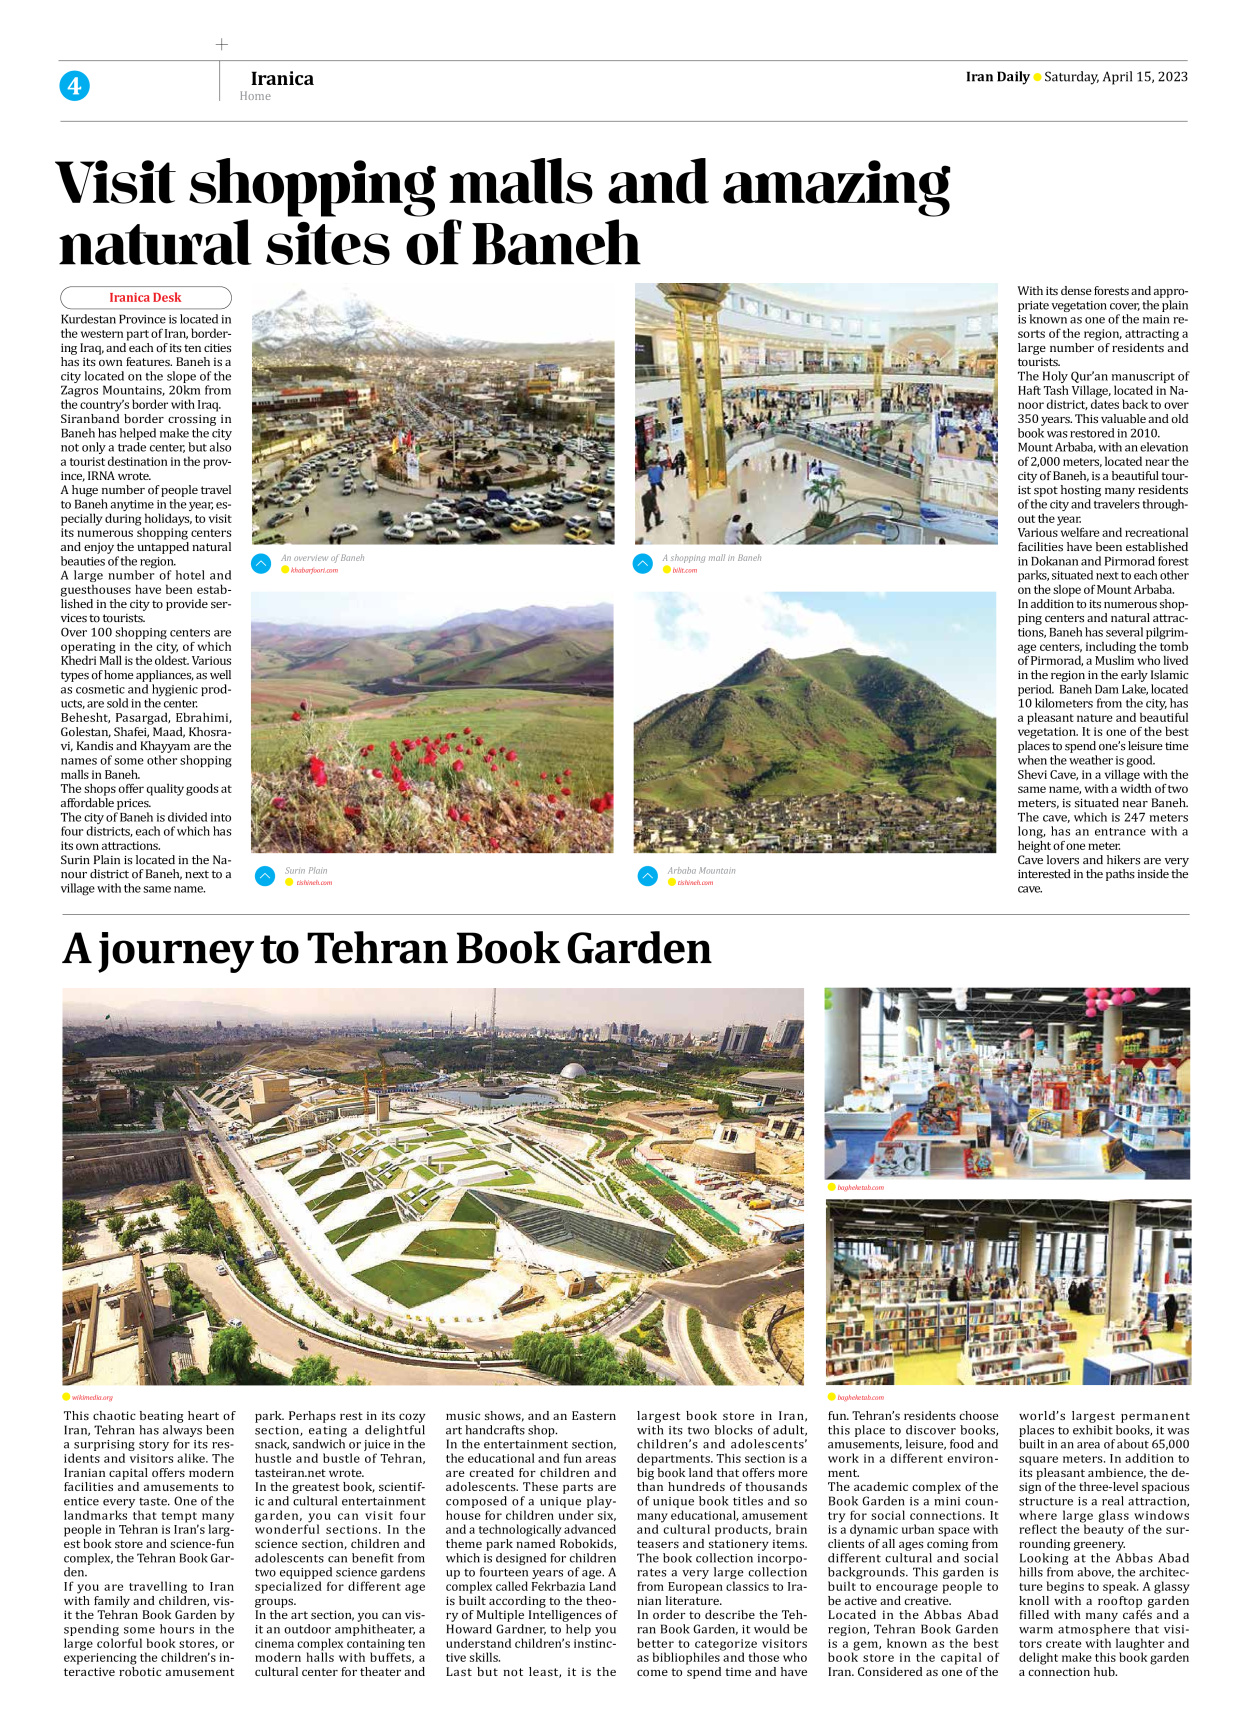 Iran Daily - Number Seven Thousand Two Hundred and Sixty Eight - 15 April 2023 - Page 4